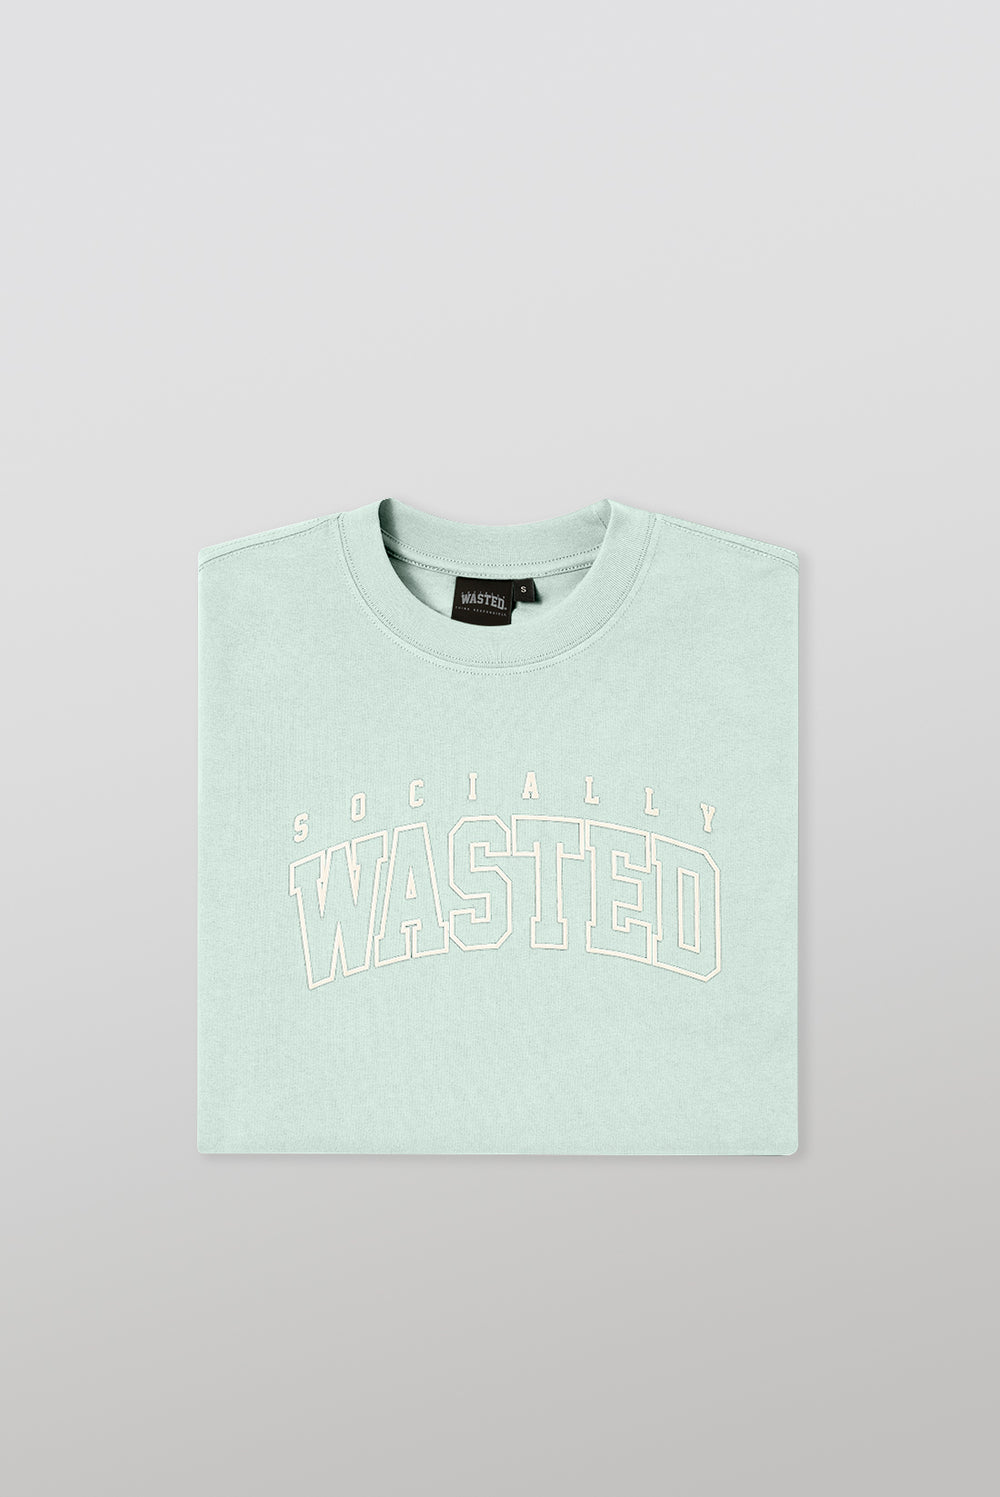 Socially Wasted Flagship Sky Blue